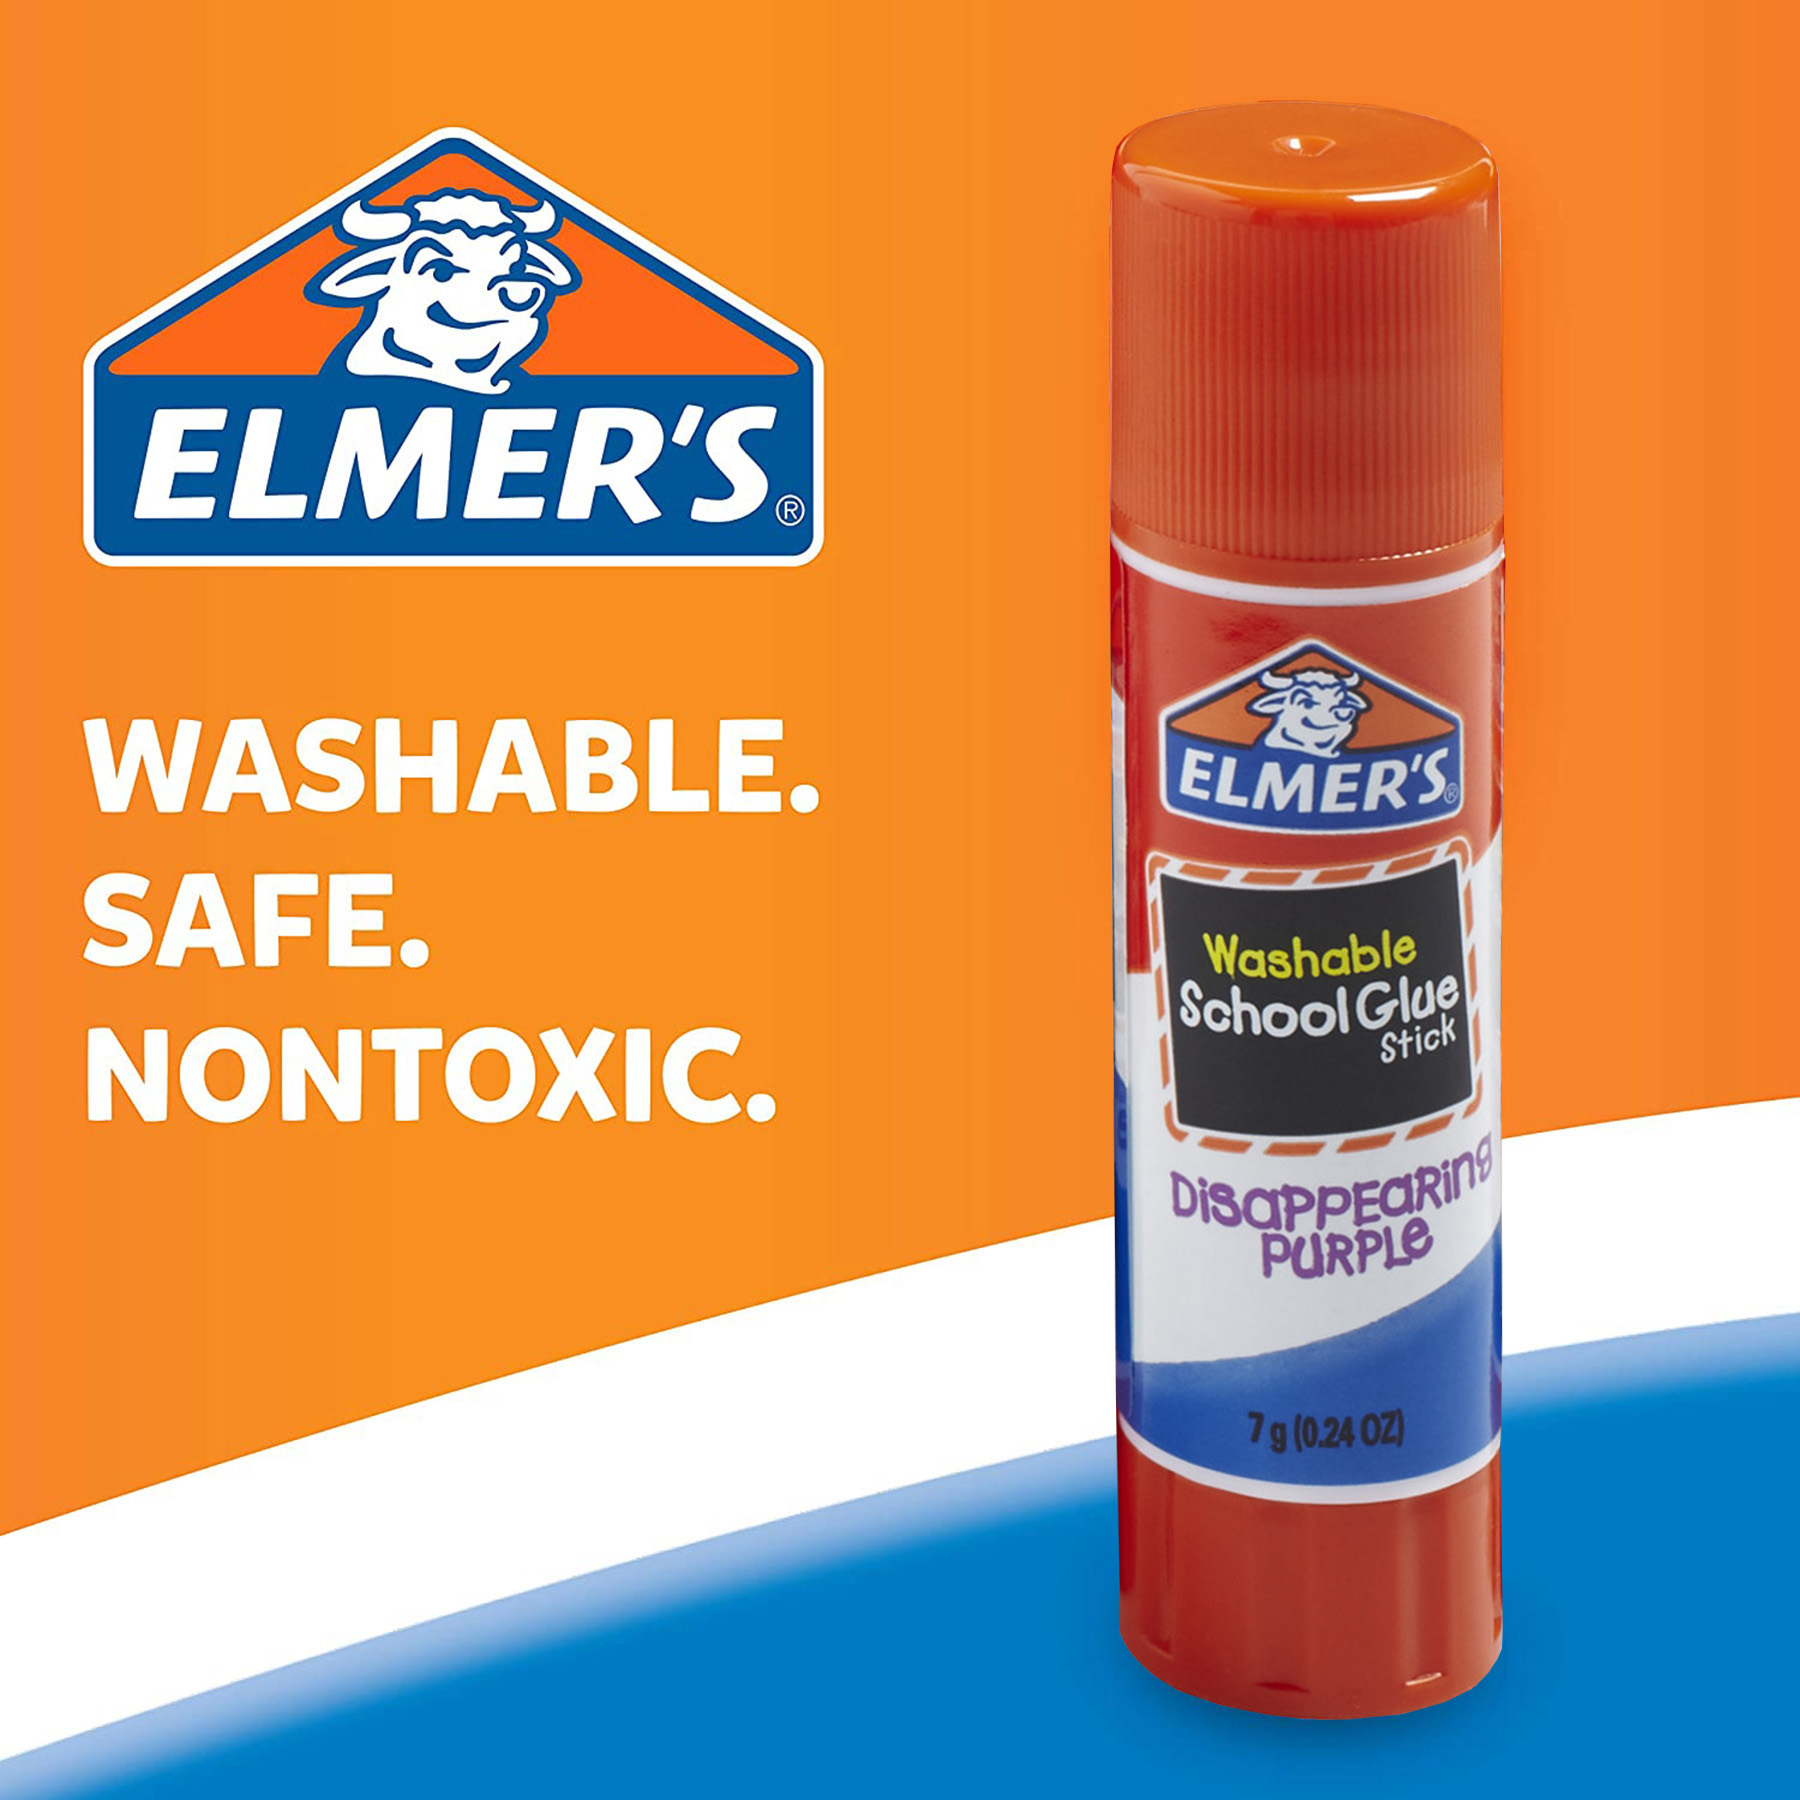 Elmer's Disappearing Purple School Glue Sticks, Washable, 7g (0.24 oz), 4 Count - image 2 of 5